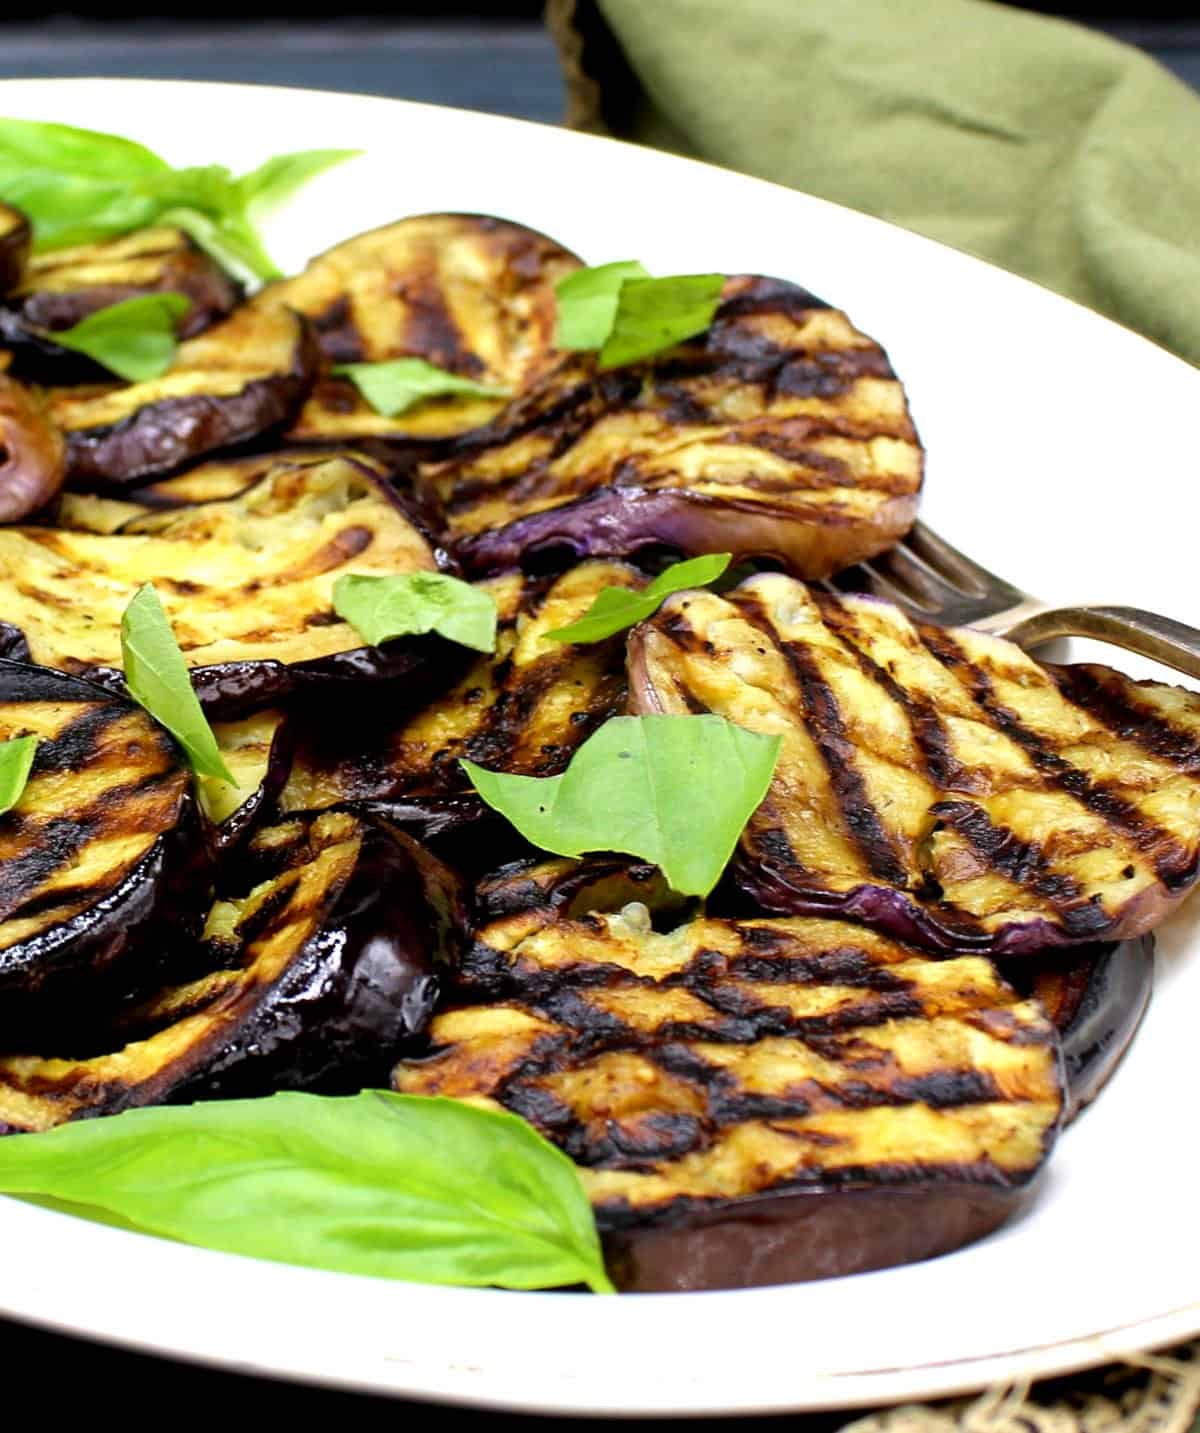 Grilled eggplant slices with basil and a fork in white platter.